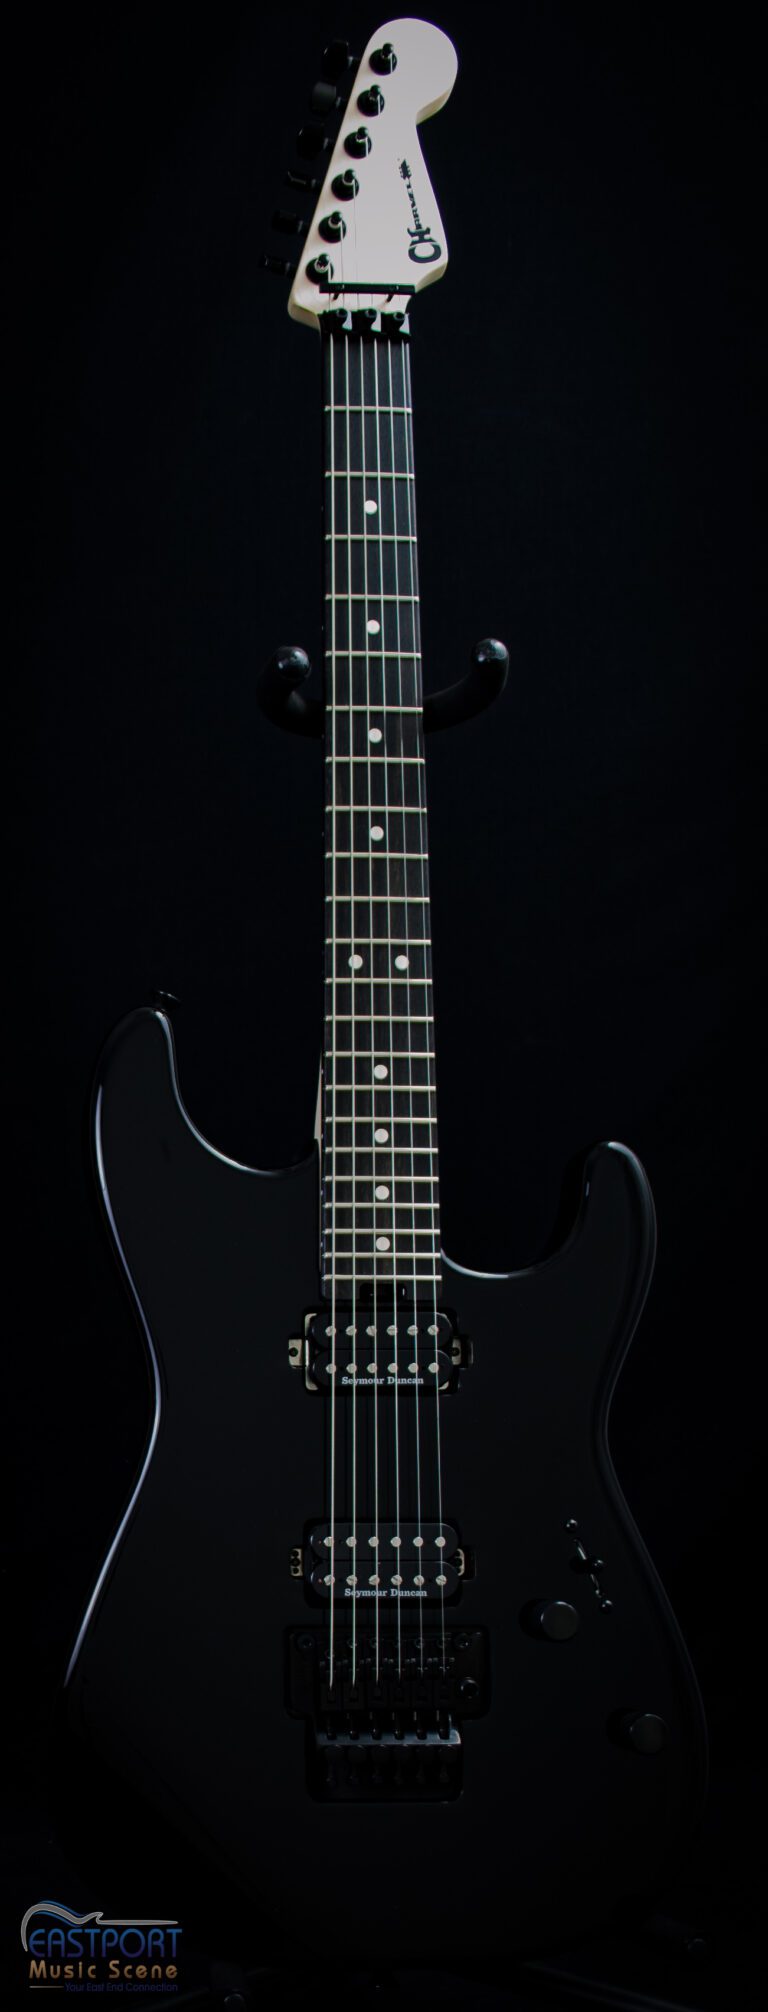 A black electric guitar with the strings missing.